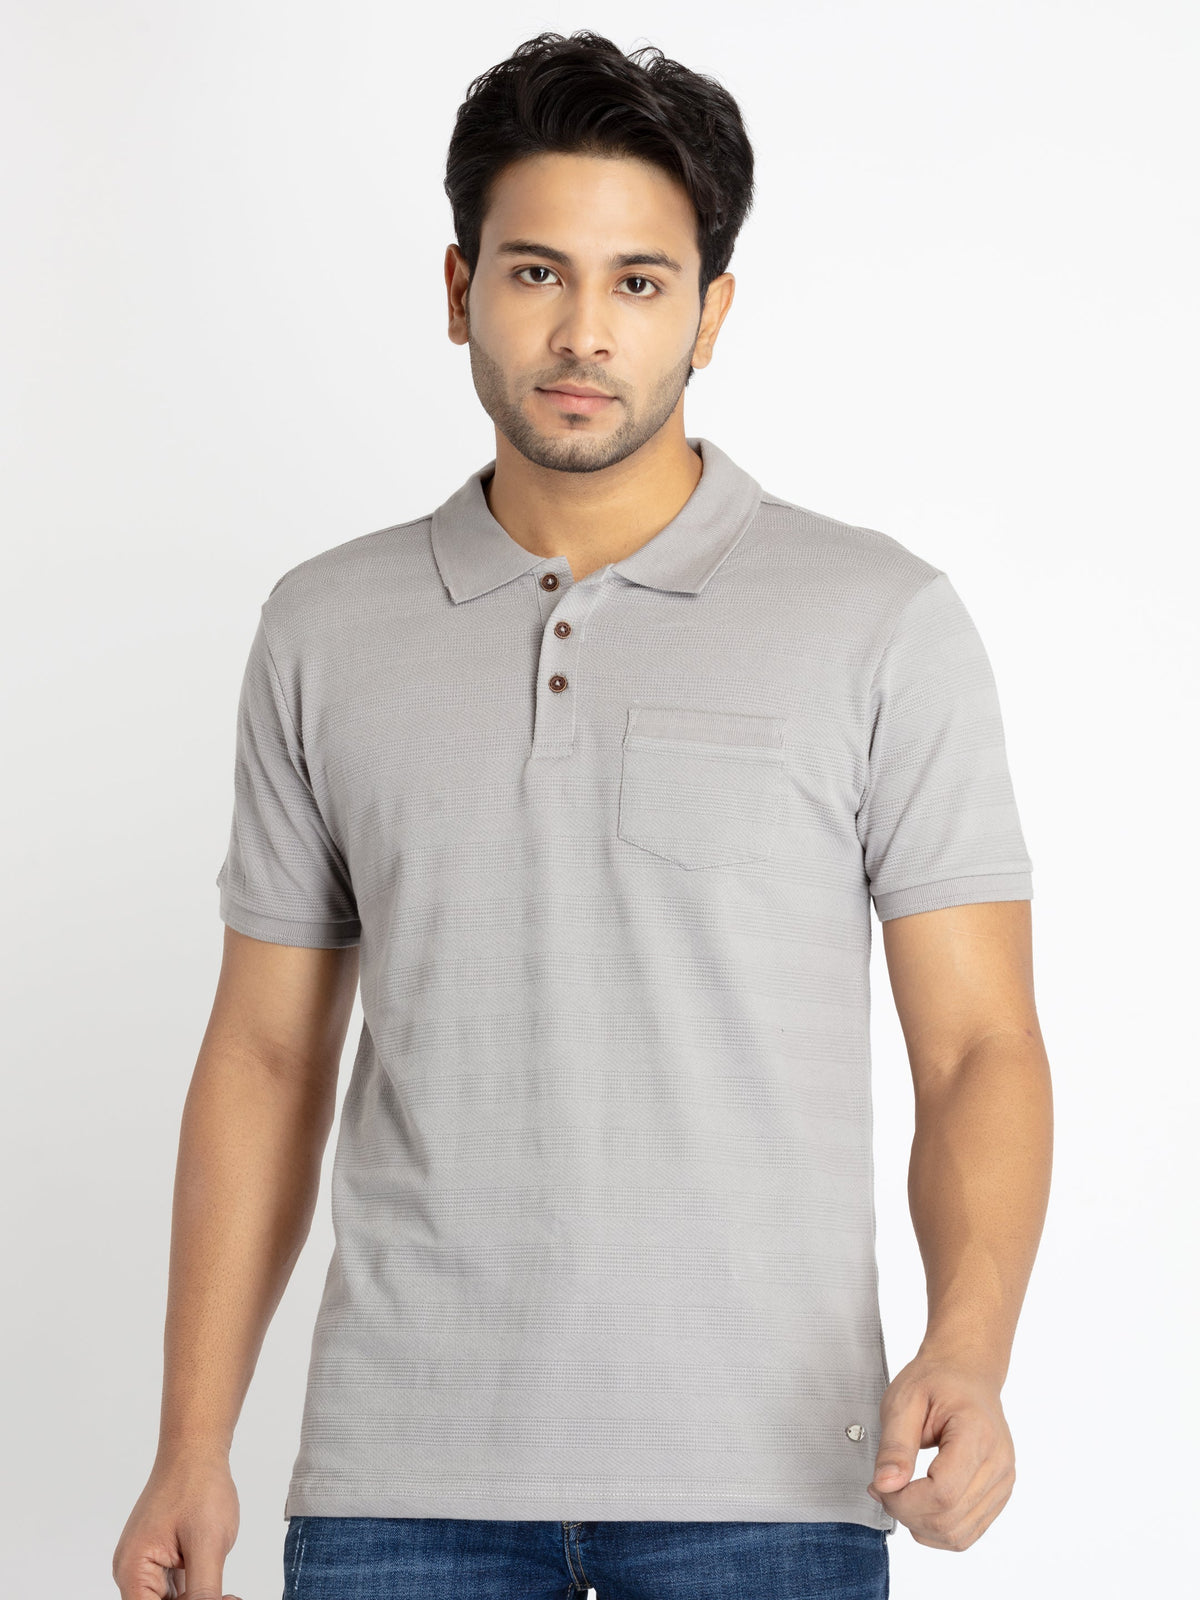 Solid polo t shirt